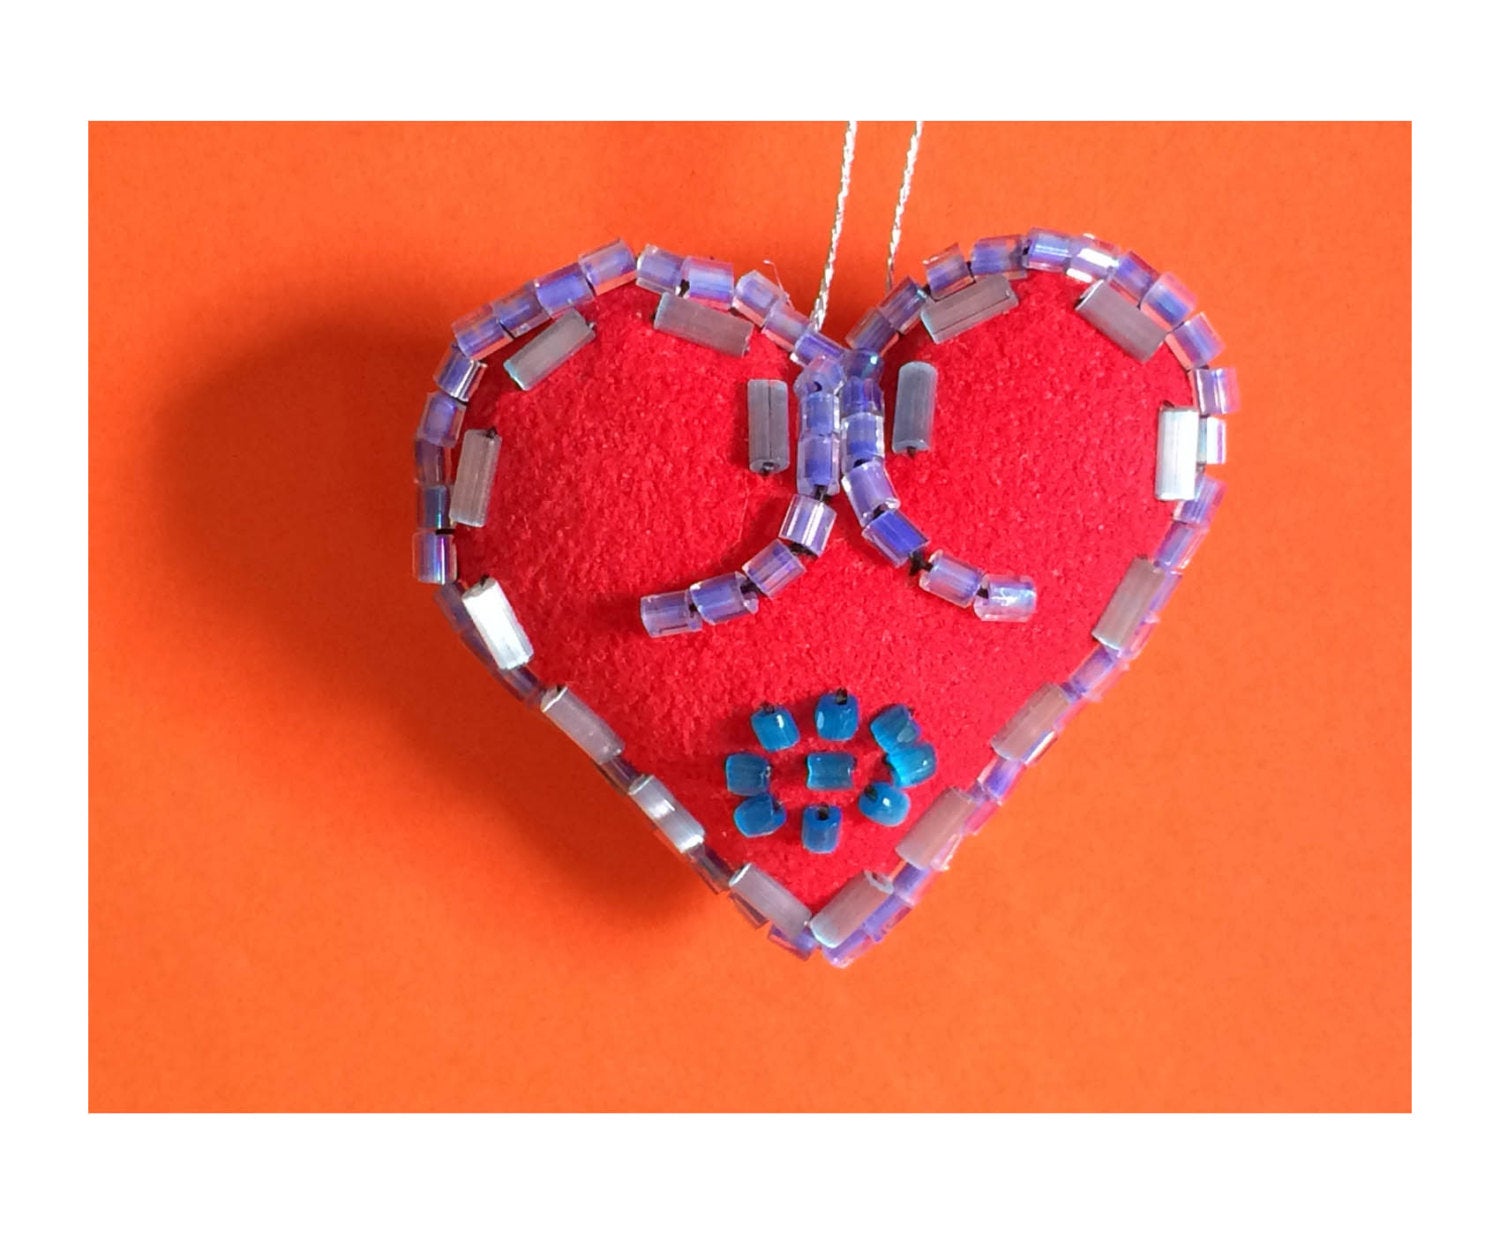 Valentines Heart - Valentines Gift - Beaded Heart - Decorative Heart - Heart Charm - Heart Ornament - Purple, Silver, Turquoise Beads